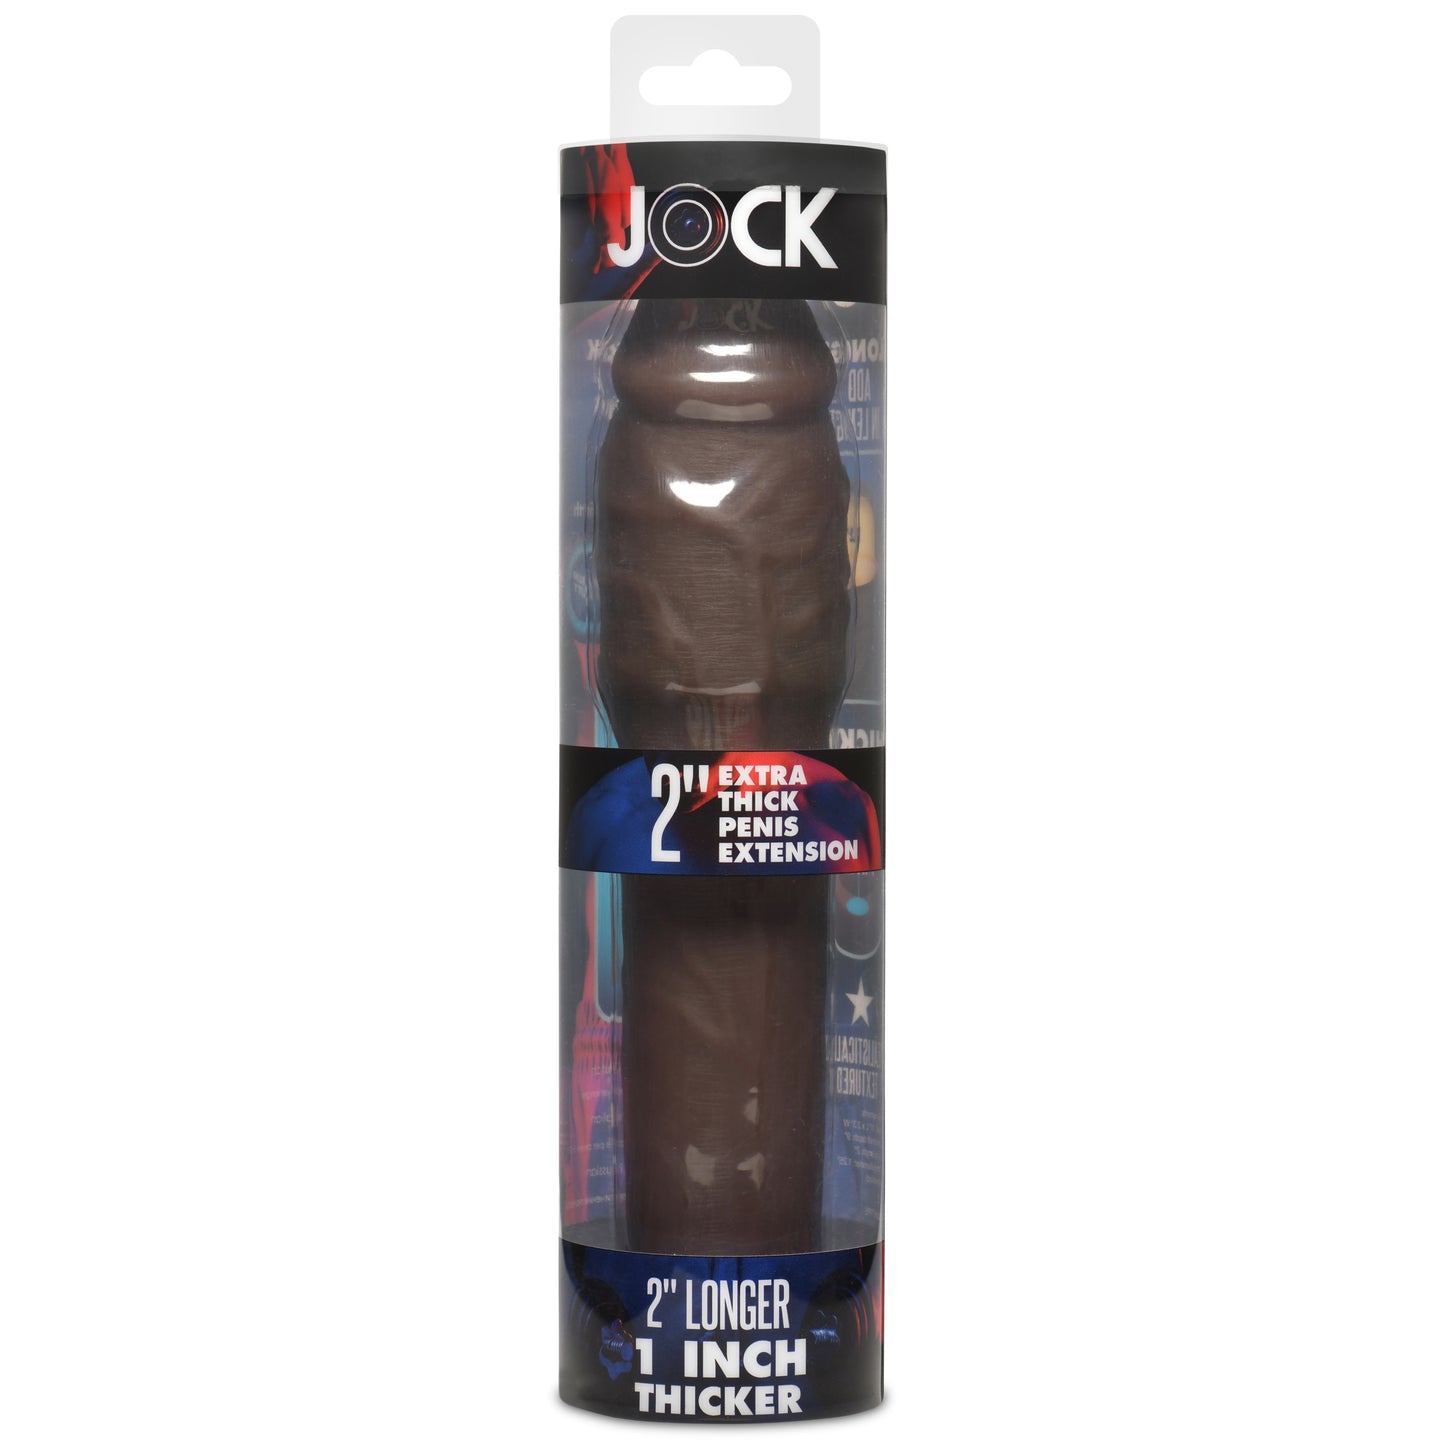 Extra Thick 2 Inch Penis Extension - Dark